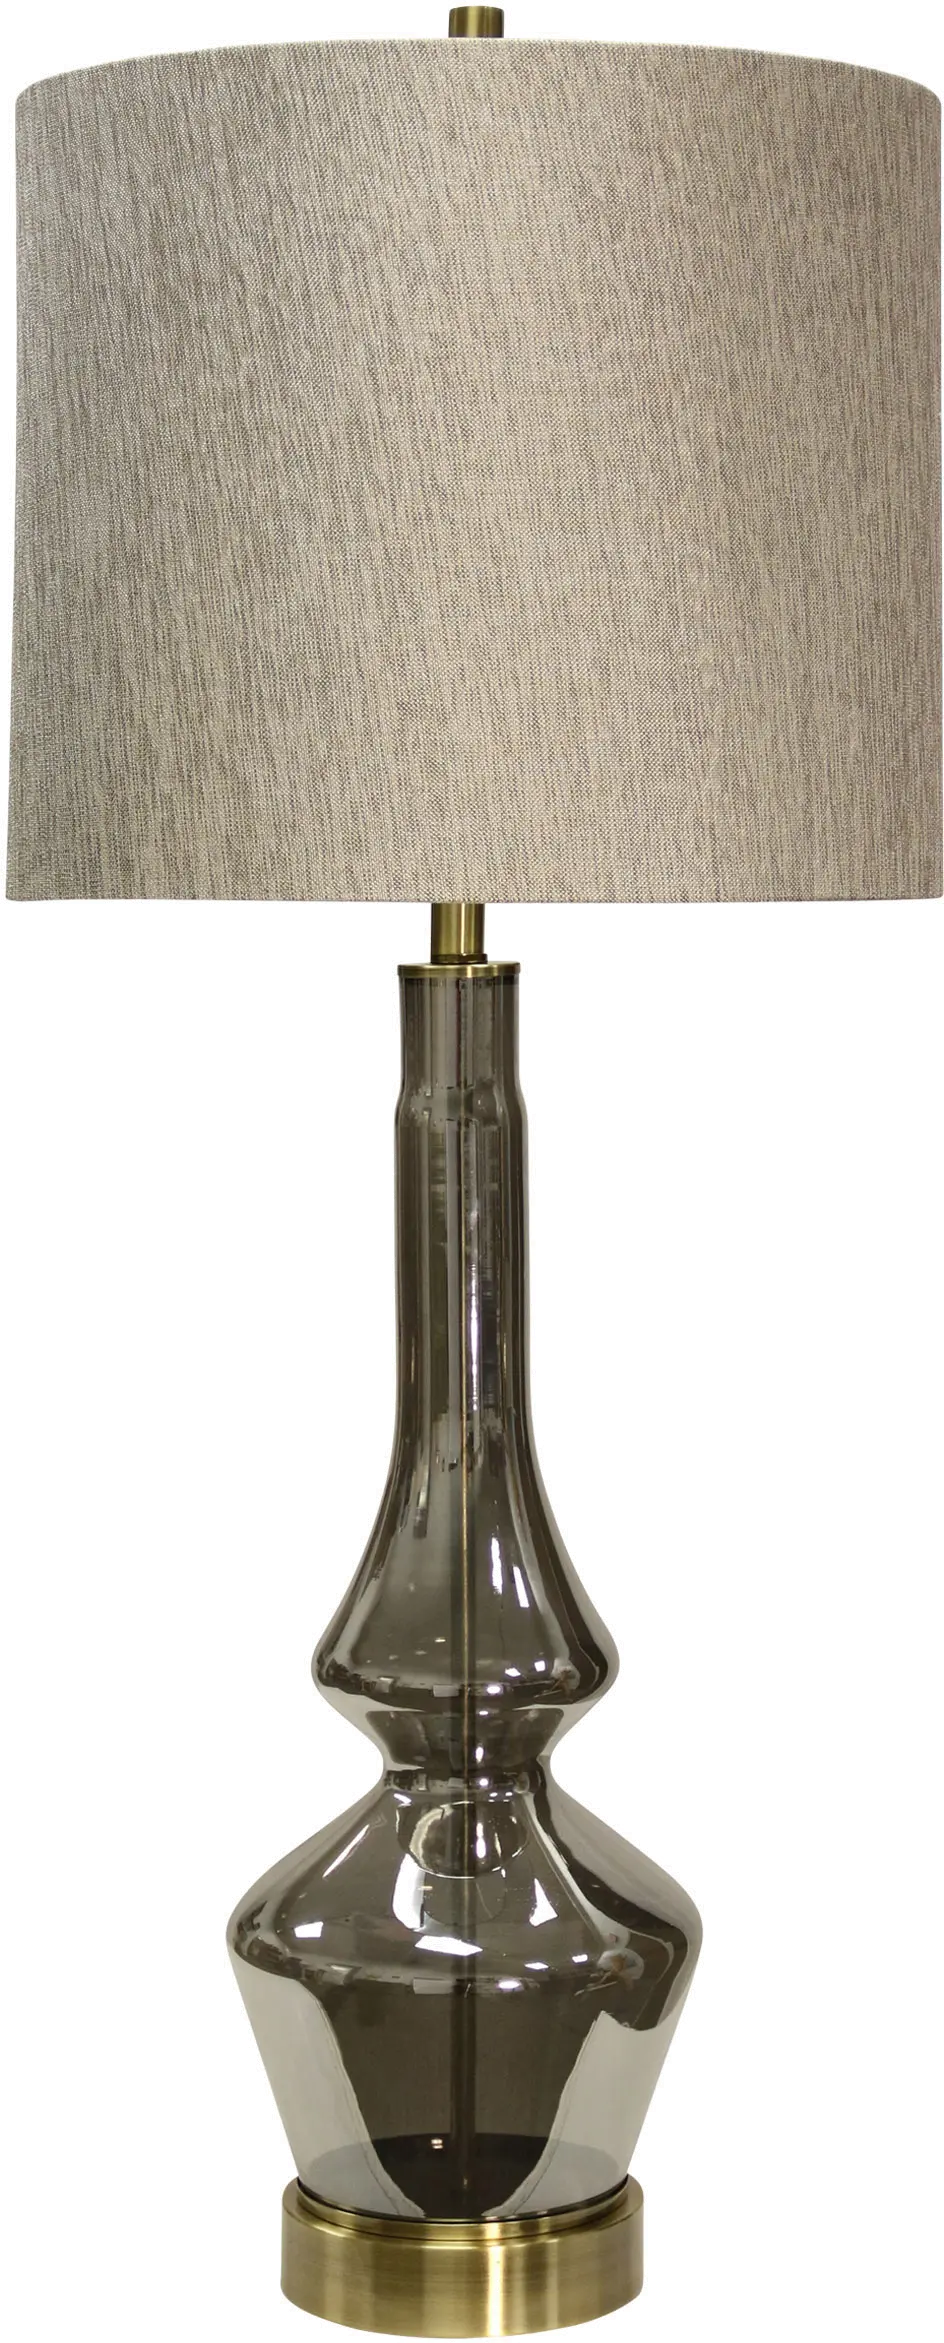 Gray Smoke Glass Table Lamp with Brass Metal Accents - Burgetts